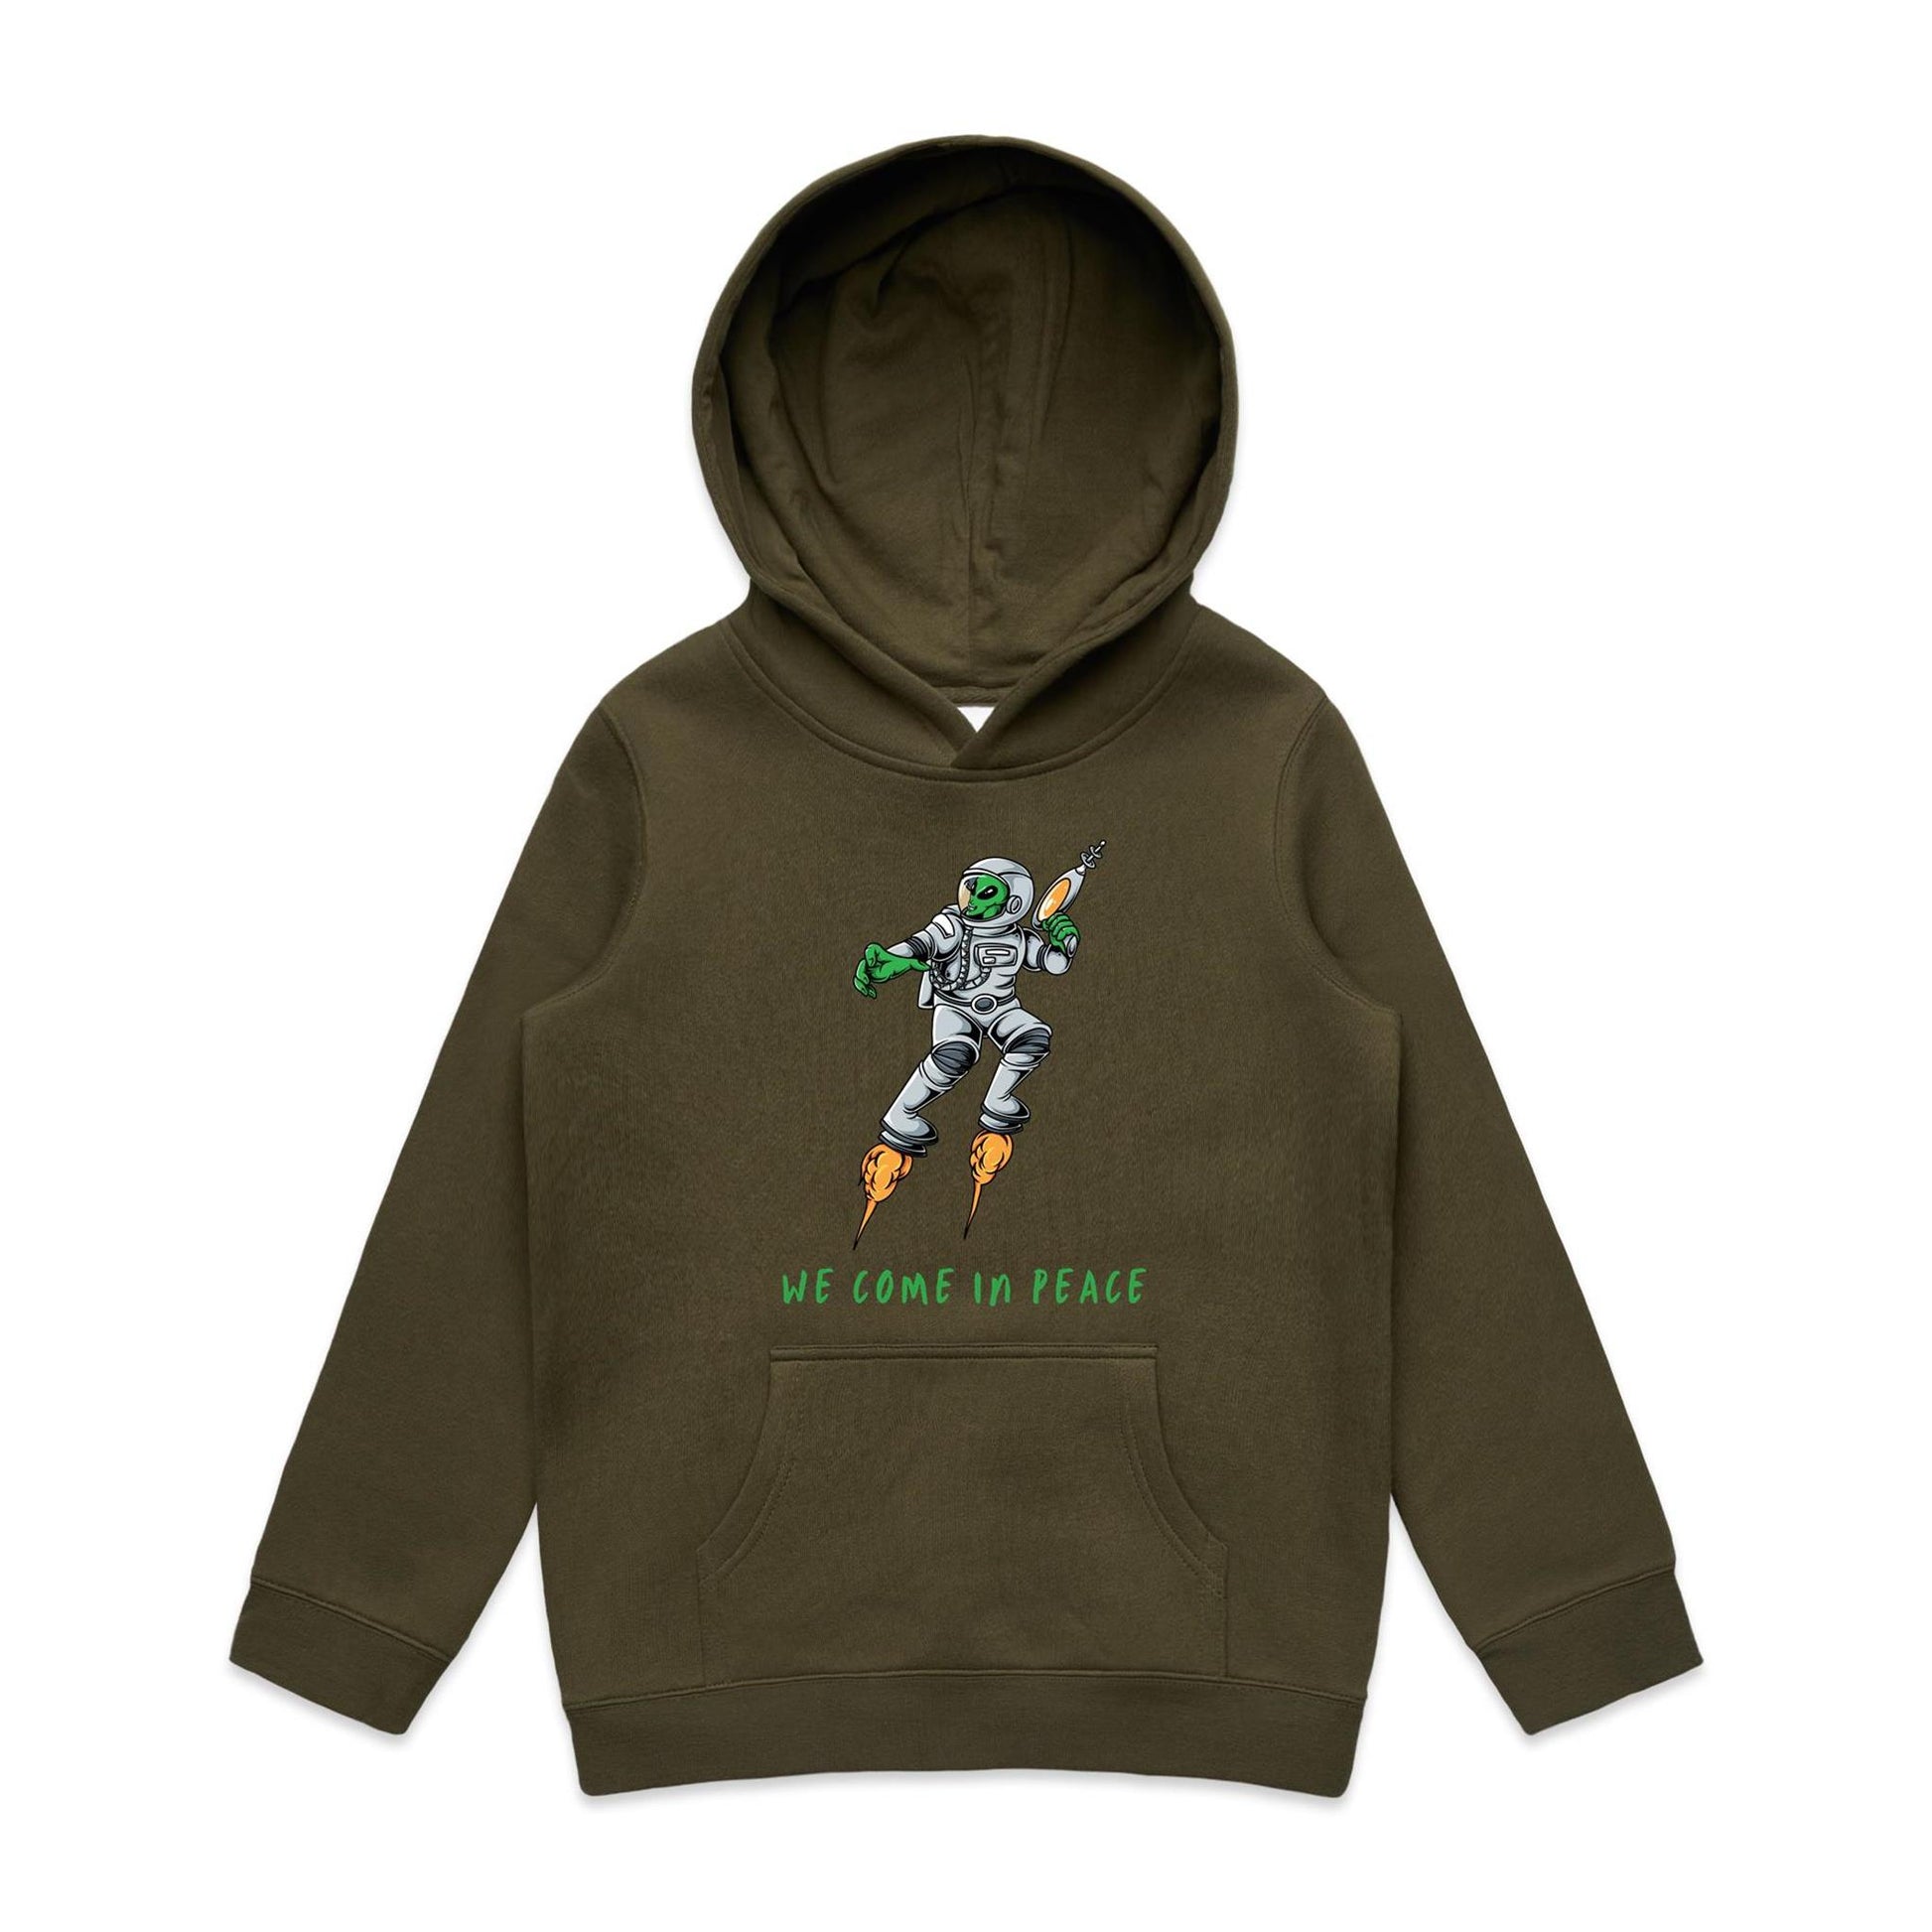 Alien, We Come In Peace - Youth Supply Hood Army Kids Hoodie Sci Fi